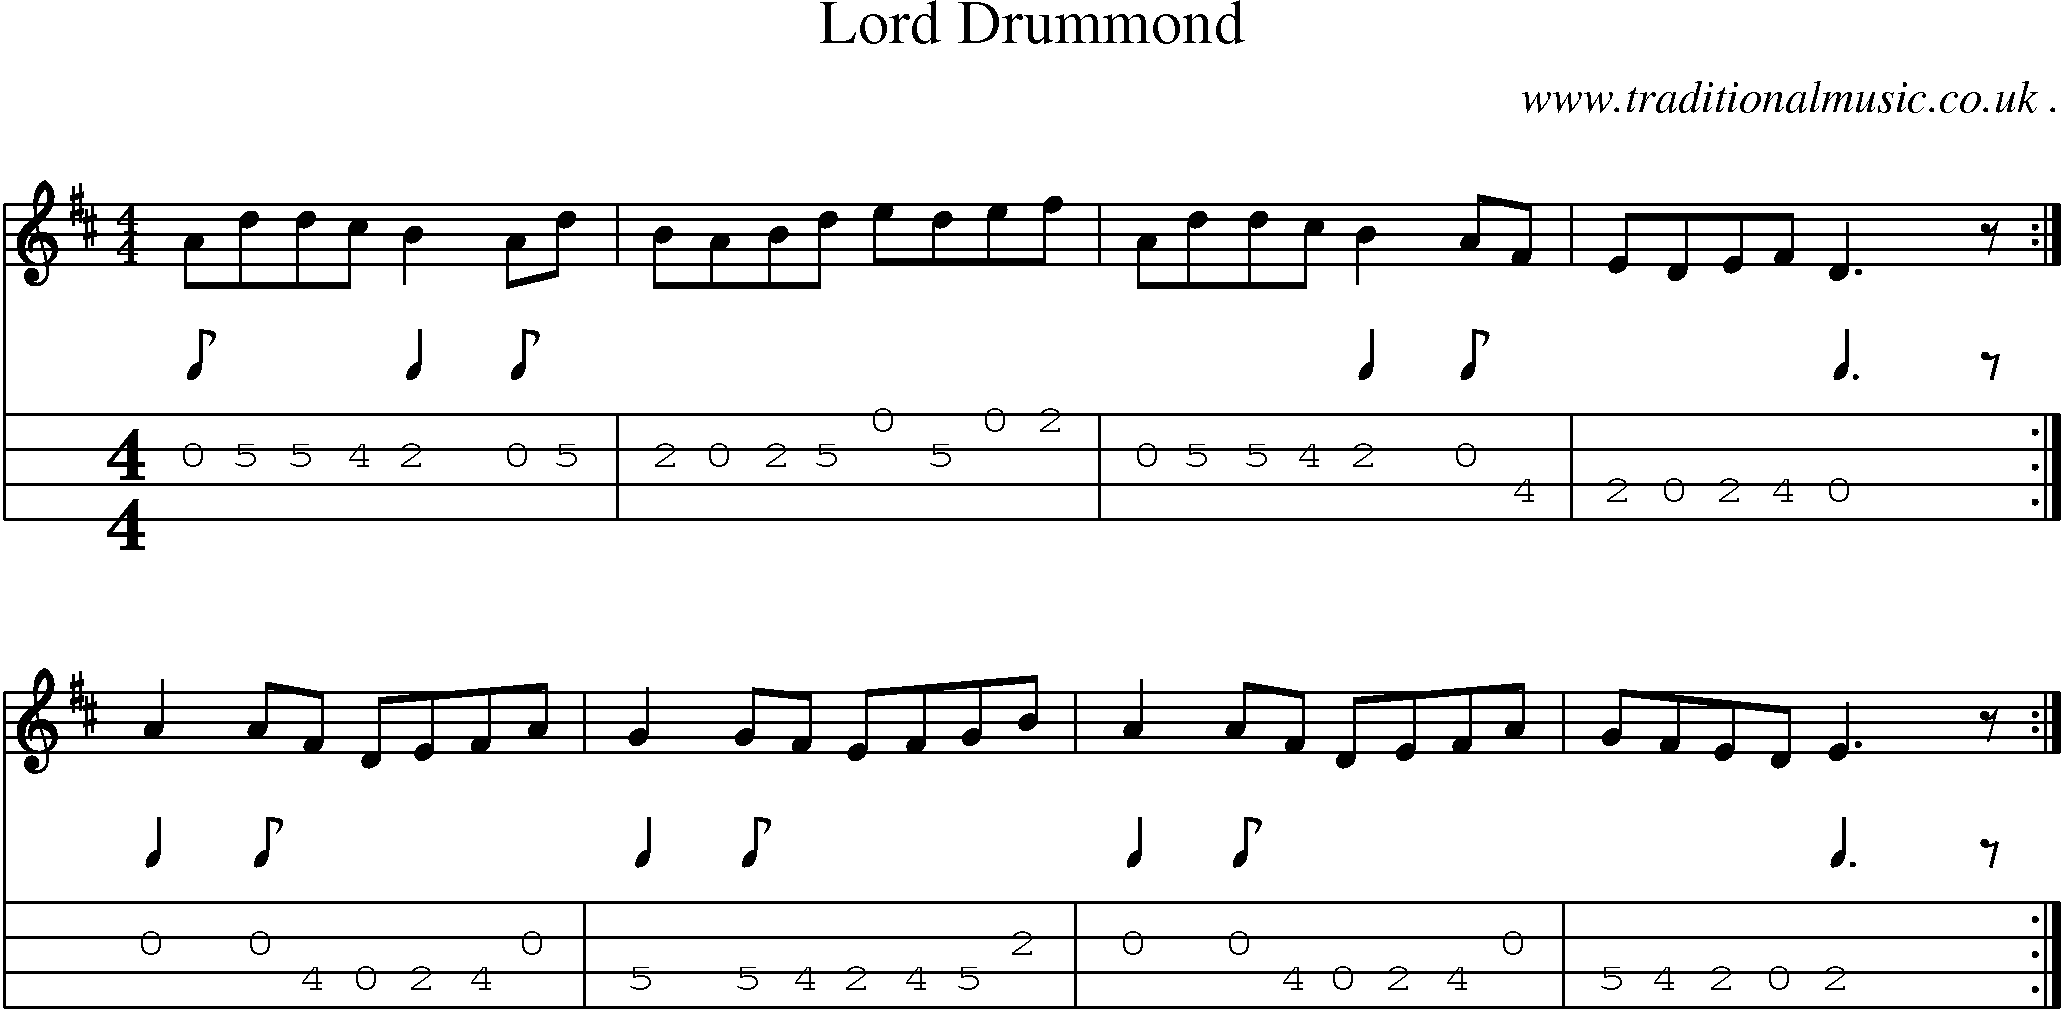 Sheet-music  score, Chords and Mandolin Tabs for Lord Drummond